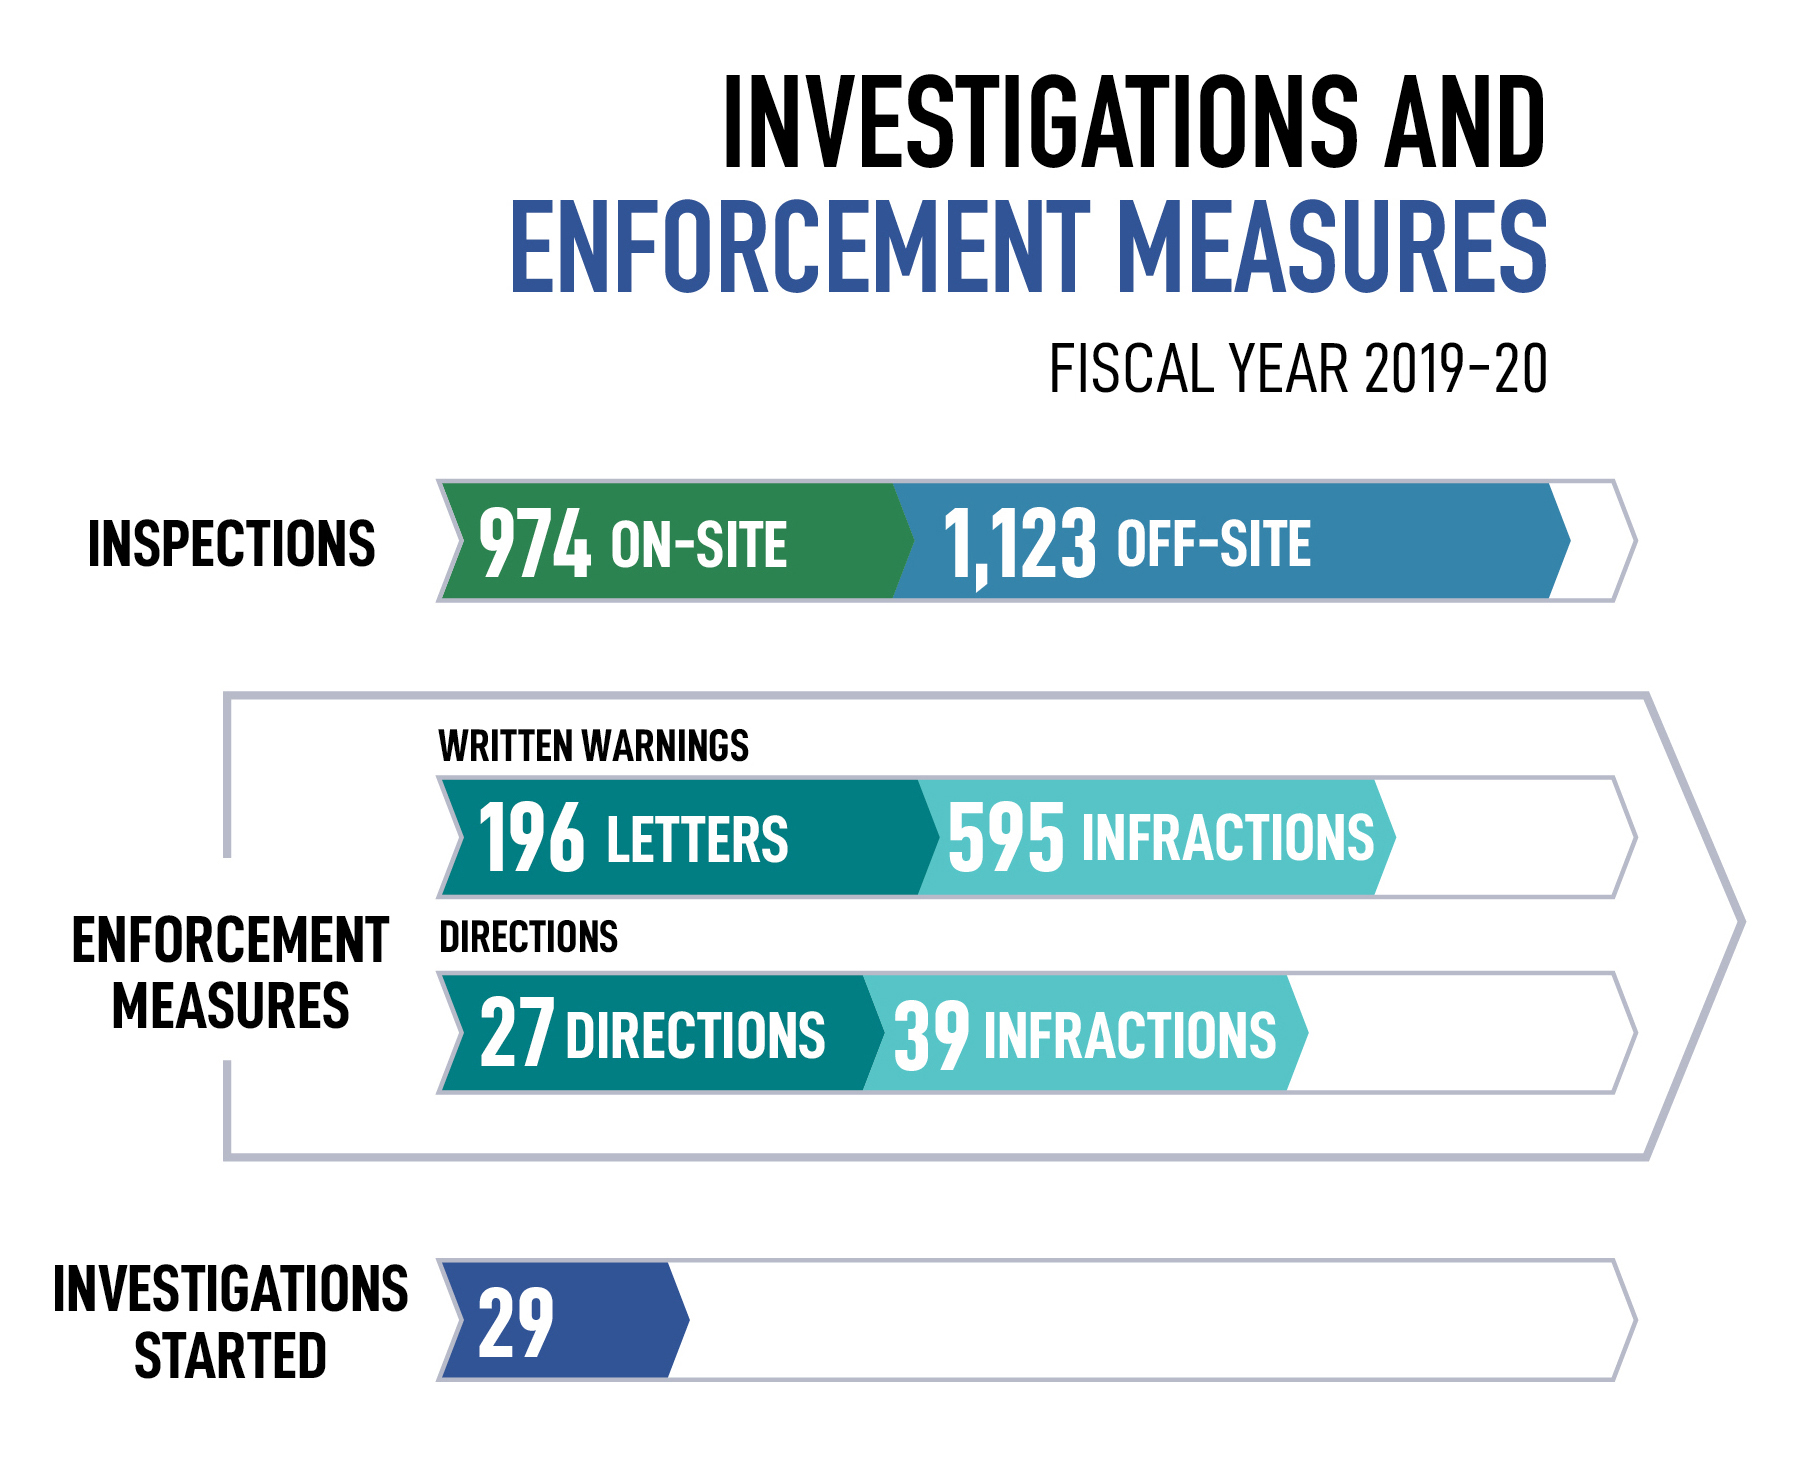 Infographic showing measures taken by enforcement officers to enforce pollution prevention provisions of the Fisheries Act, as described in section 3.5.